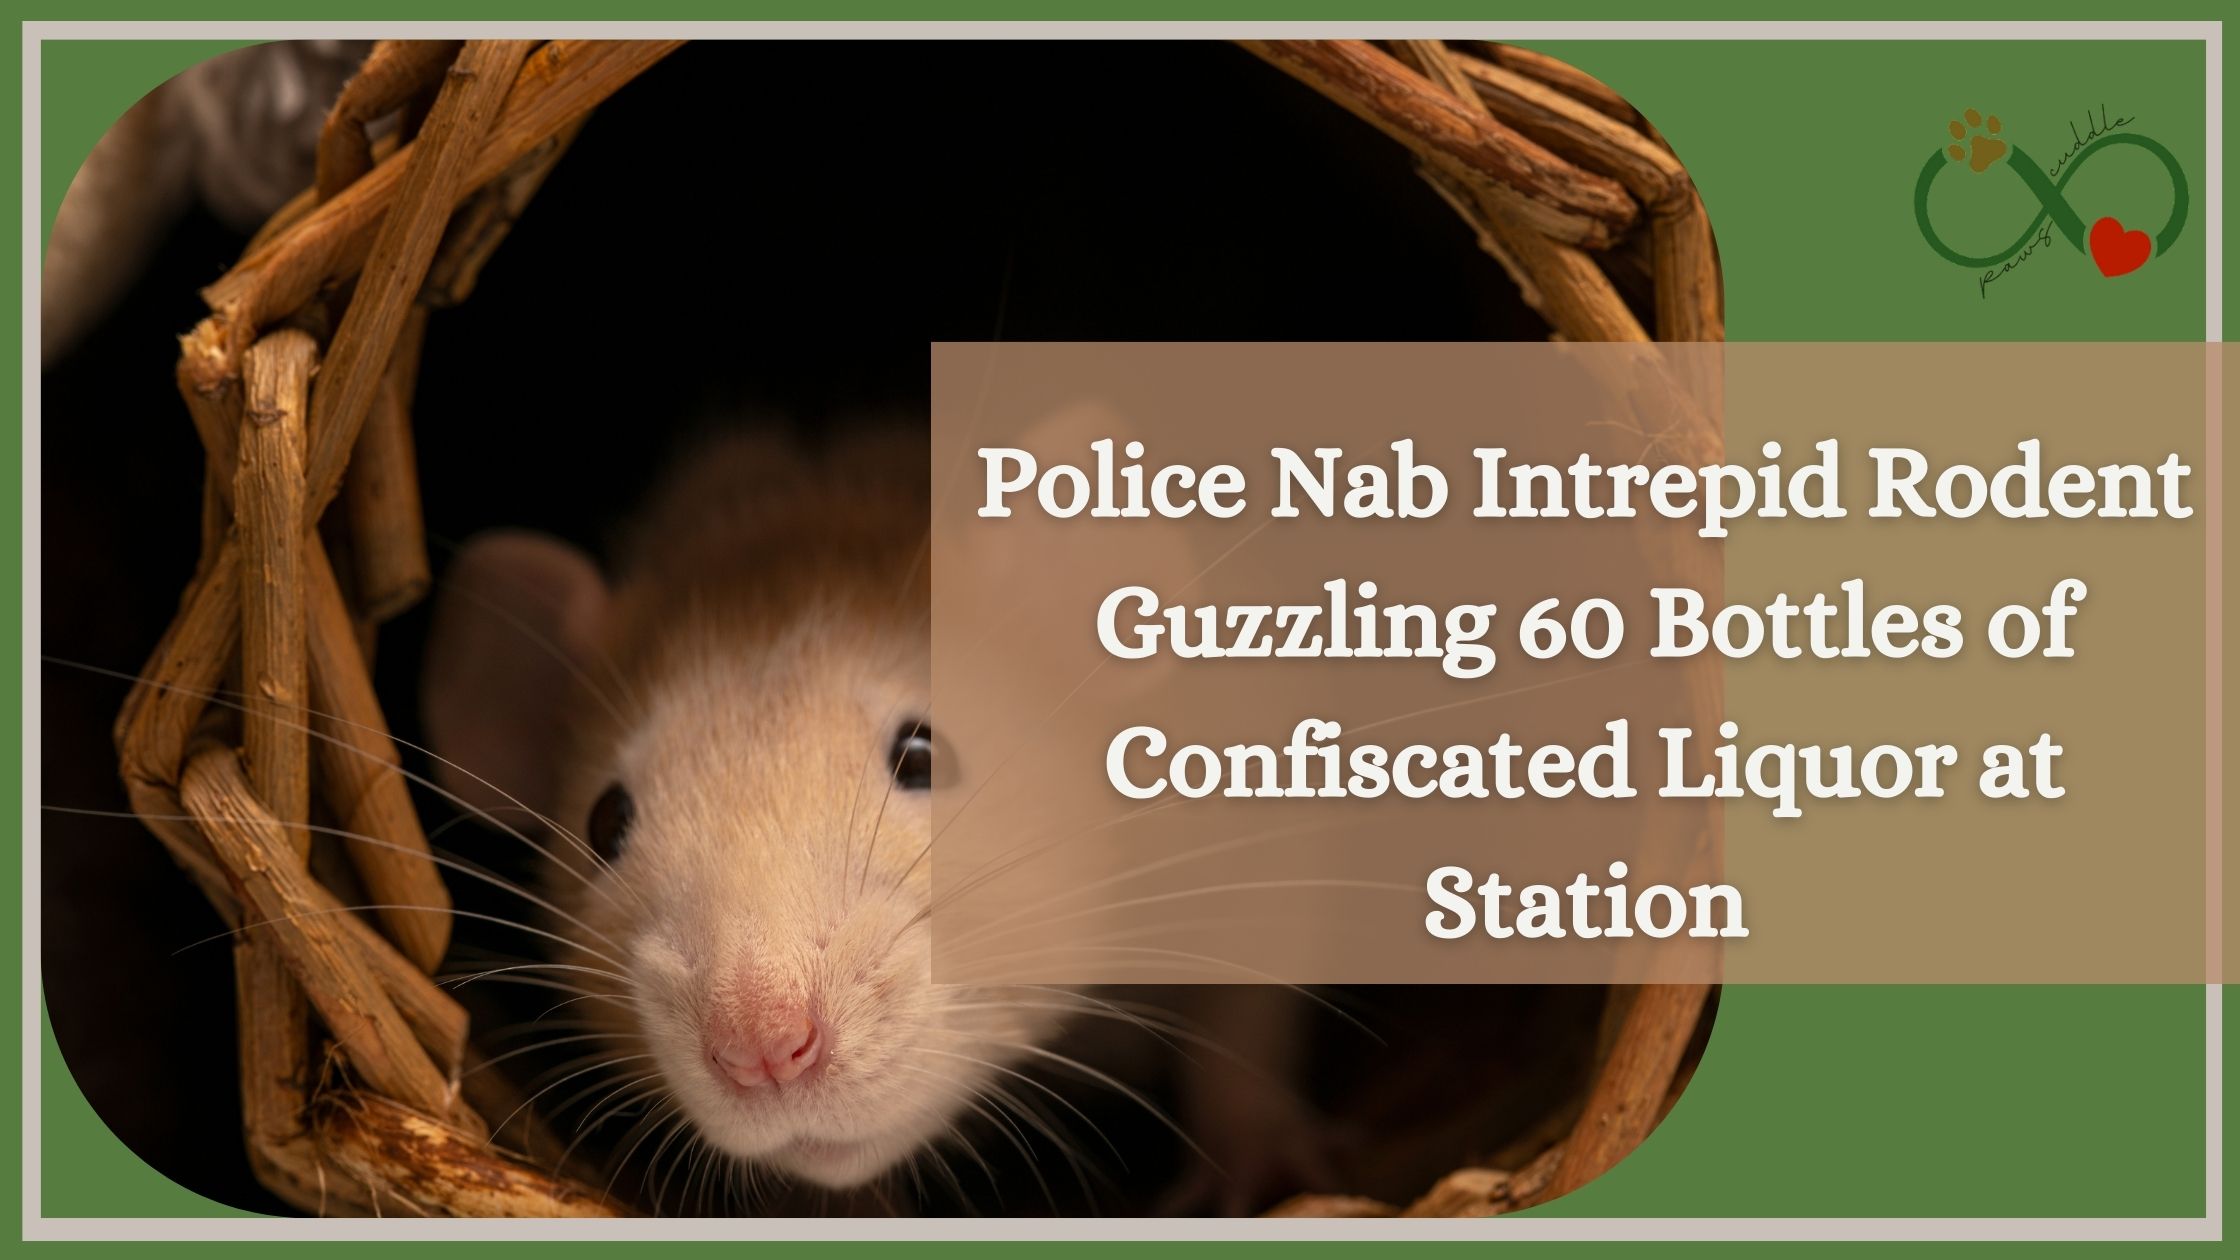 Police Nab Intrepid Rodent Guzzling 60 Bottles of Confiscated Liquor at Station